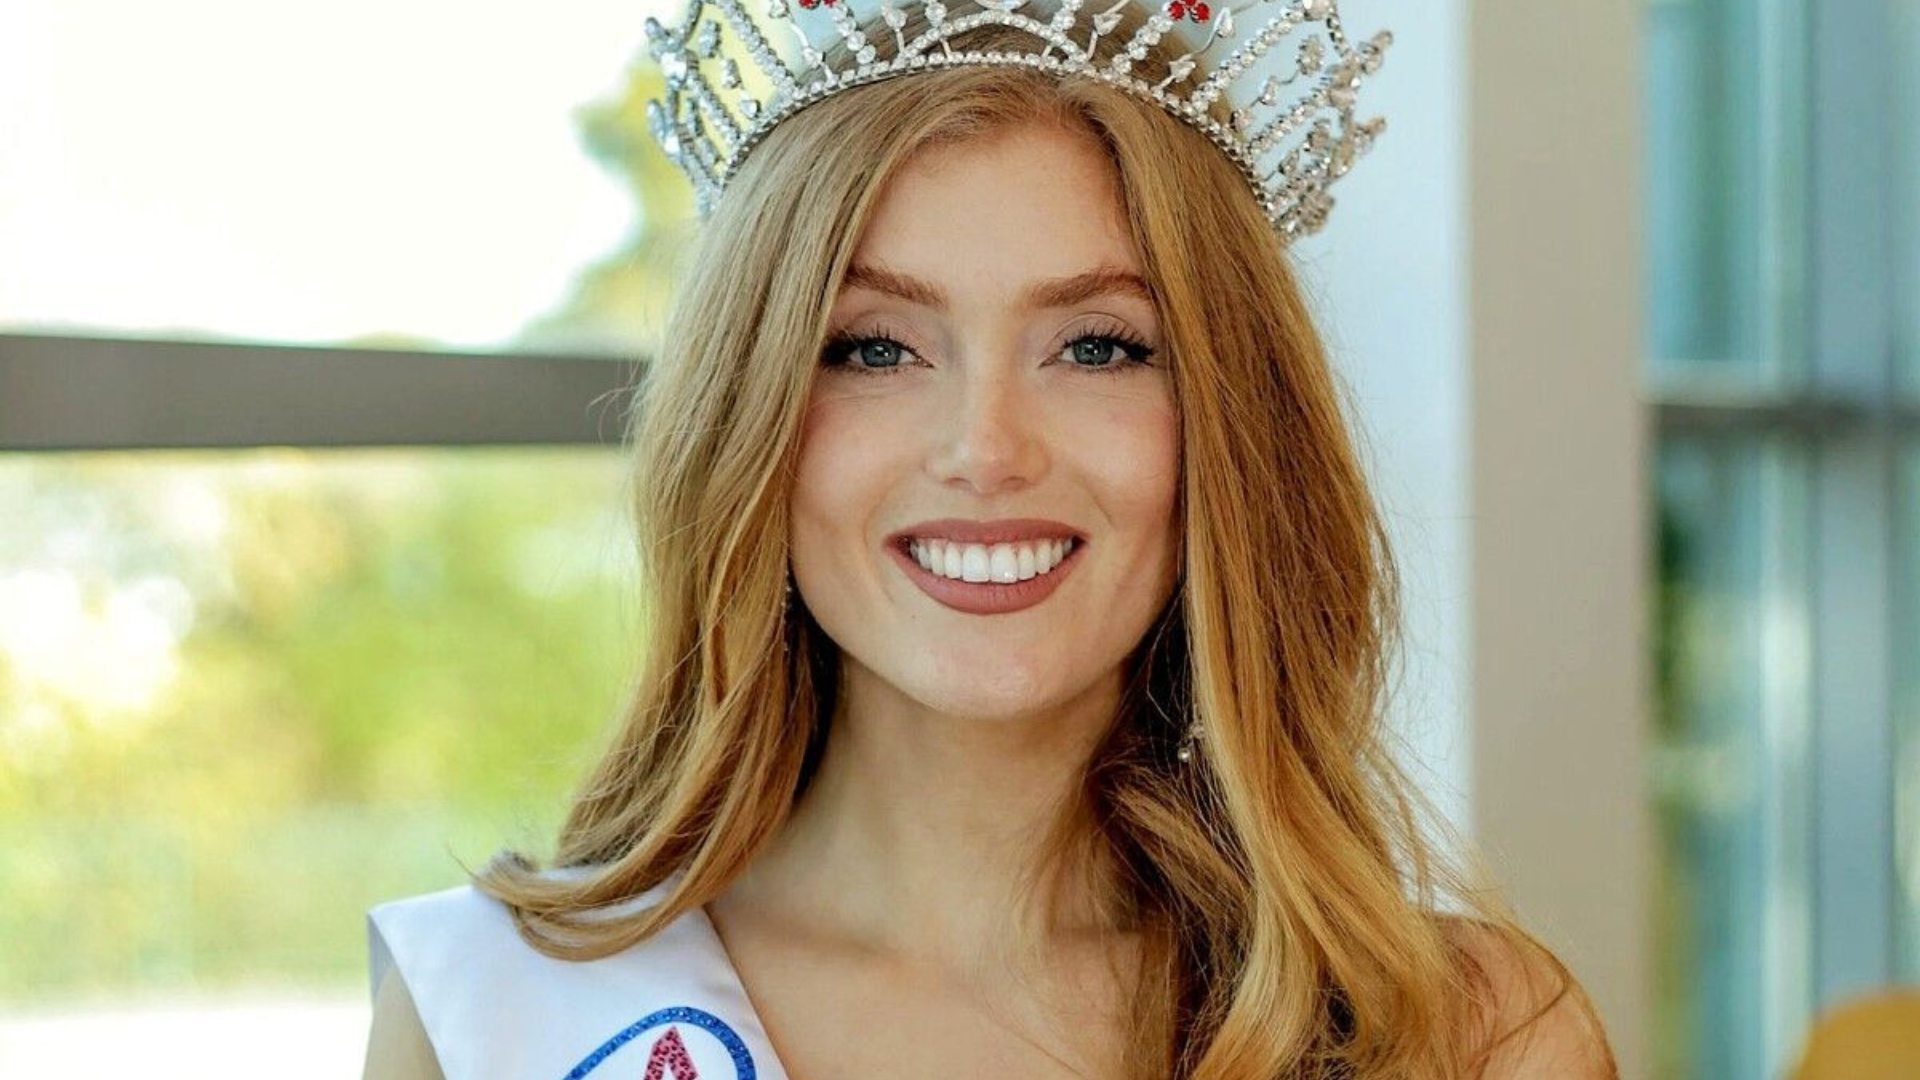 Podcast S5, Ep1: First Redhead to Win Miss England, Jessica Gagen